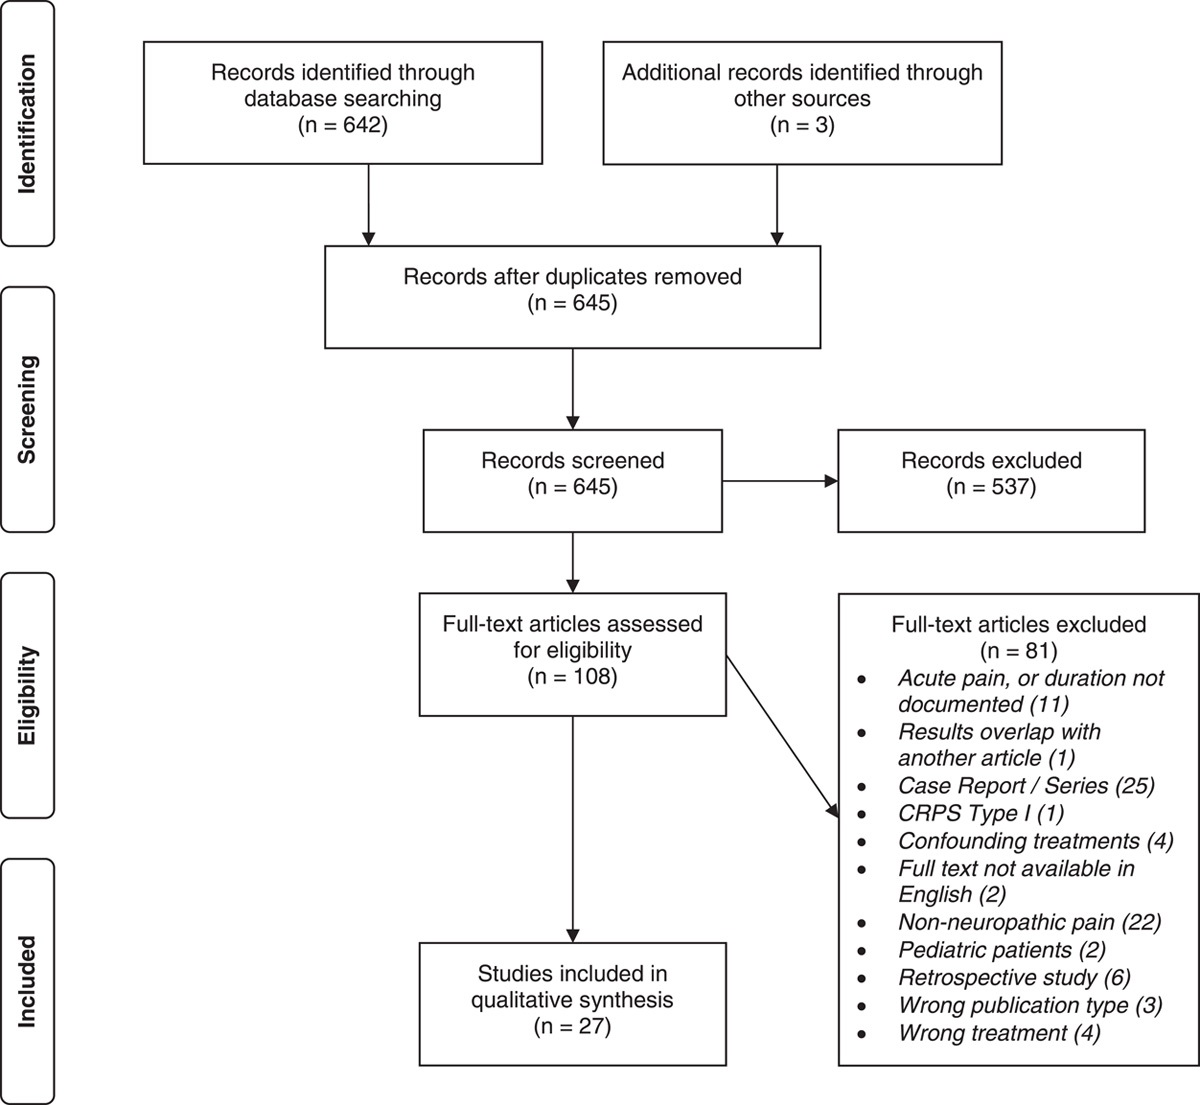 Intravenous Lidocaine in Chronic Neuropathic Pain: A Systematic Review